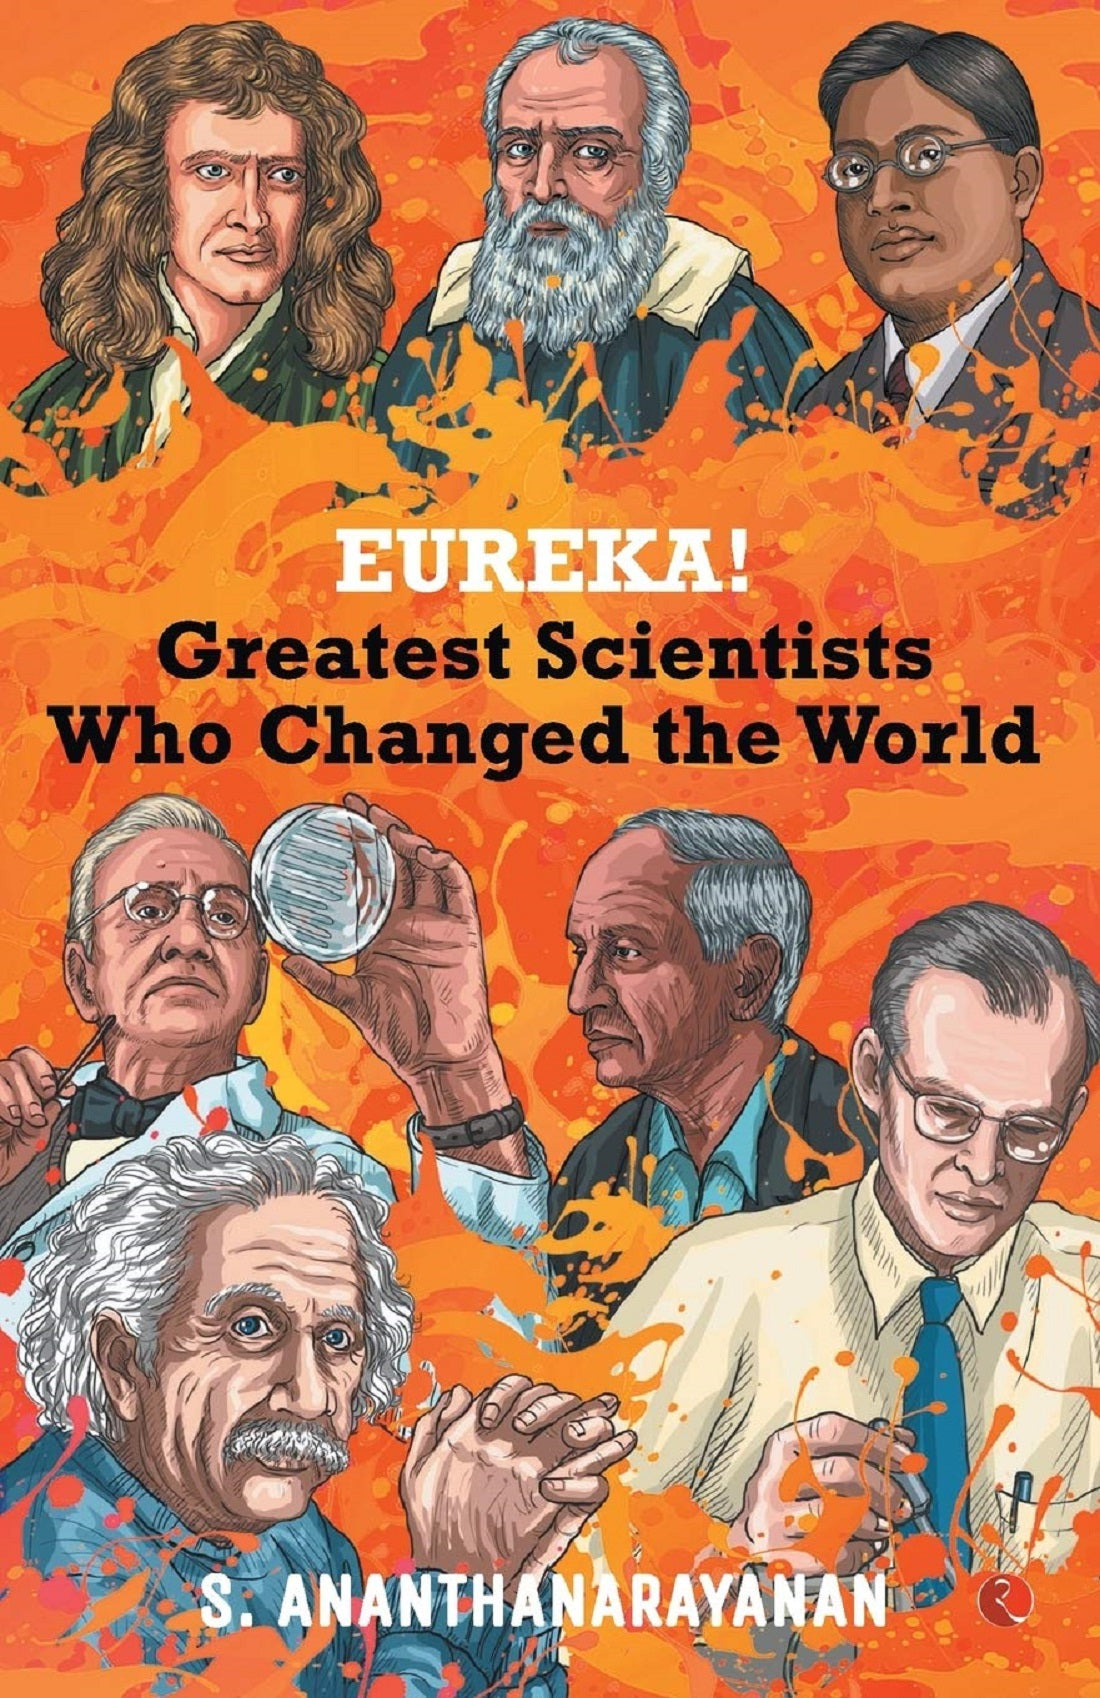 EUREKA GREATEST SCIENTISTS WHO CHANGED THE WORLD